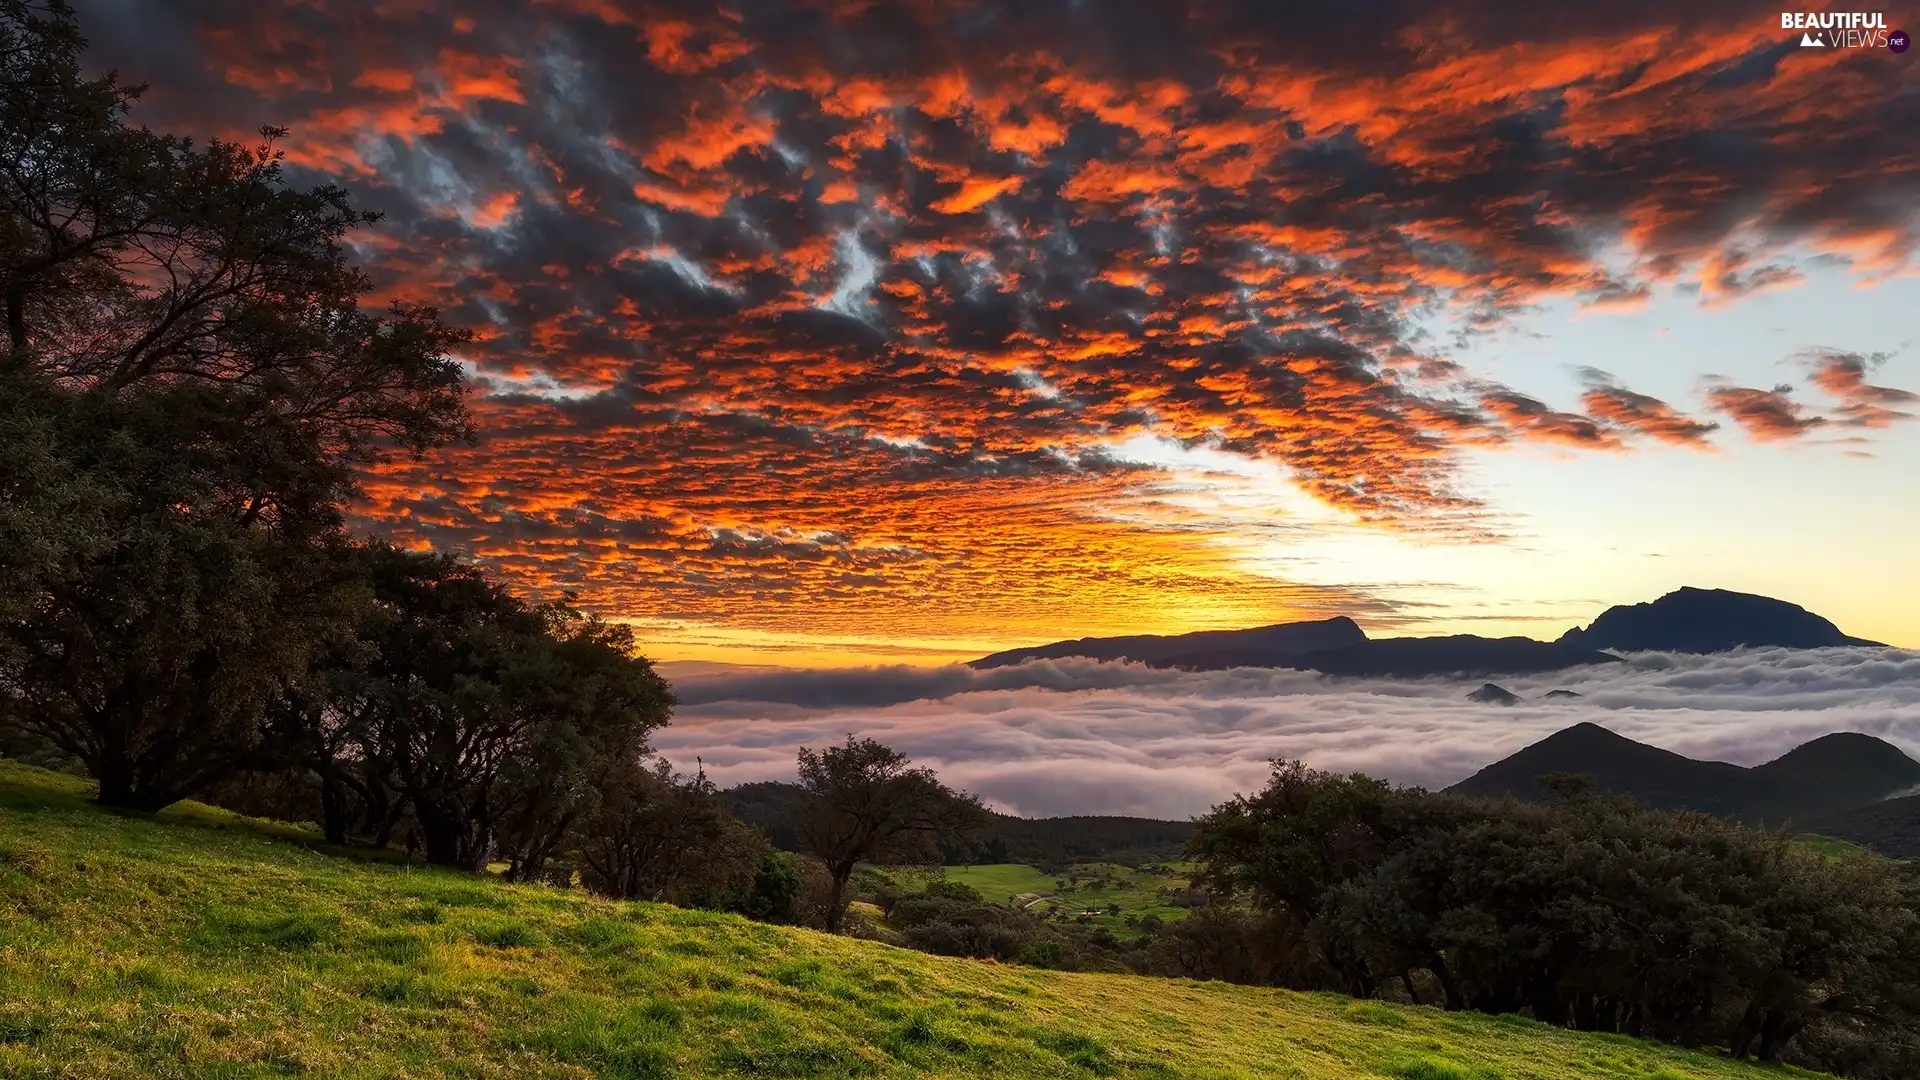 viewes, Mountains, Great Sunsets, clouds, Fog, trees